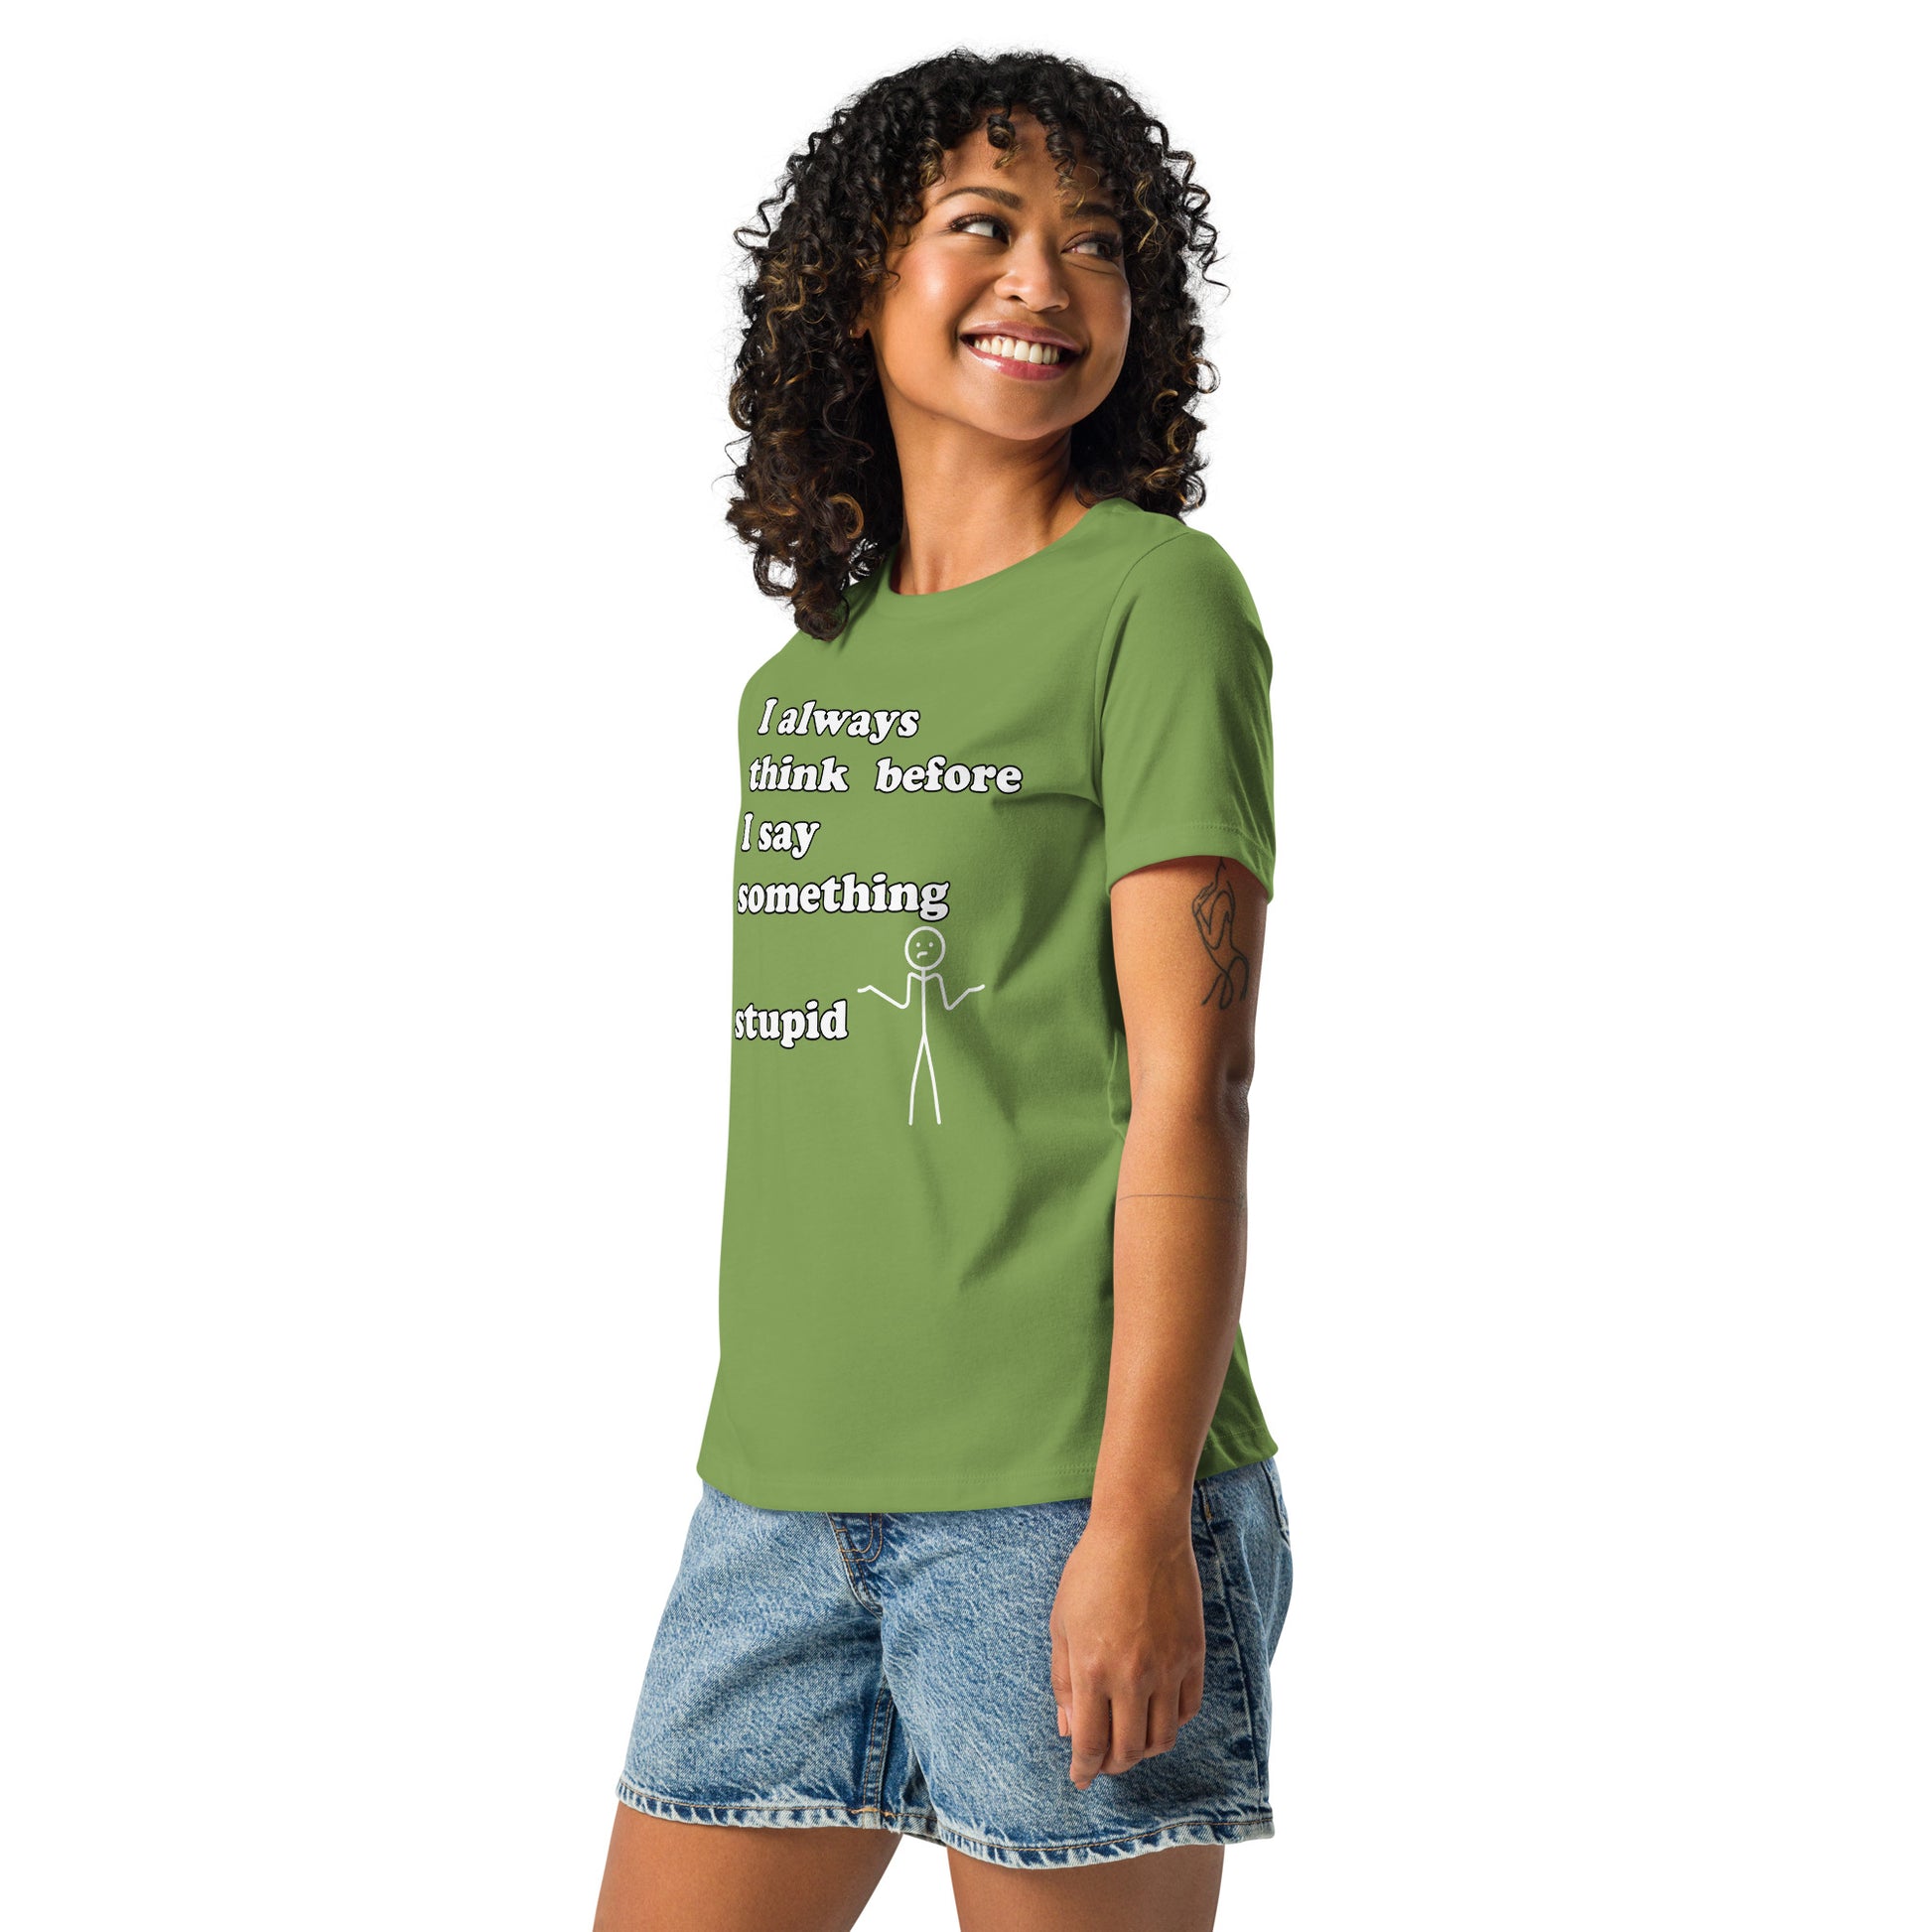 Woman with leaf green t-shirt with text "I always think before I say something stupid"